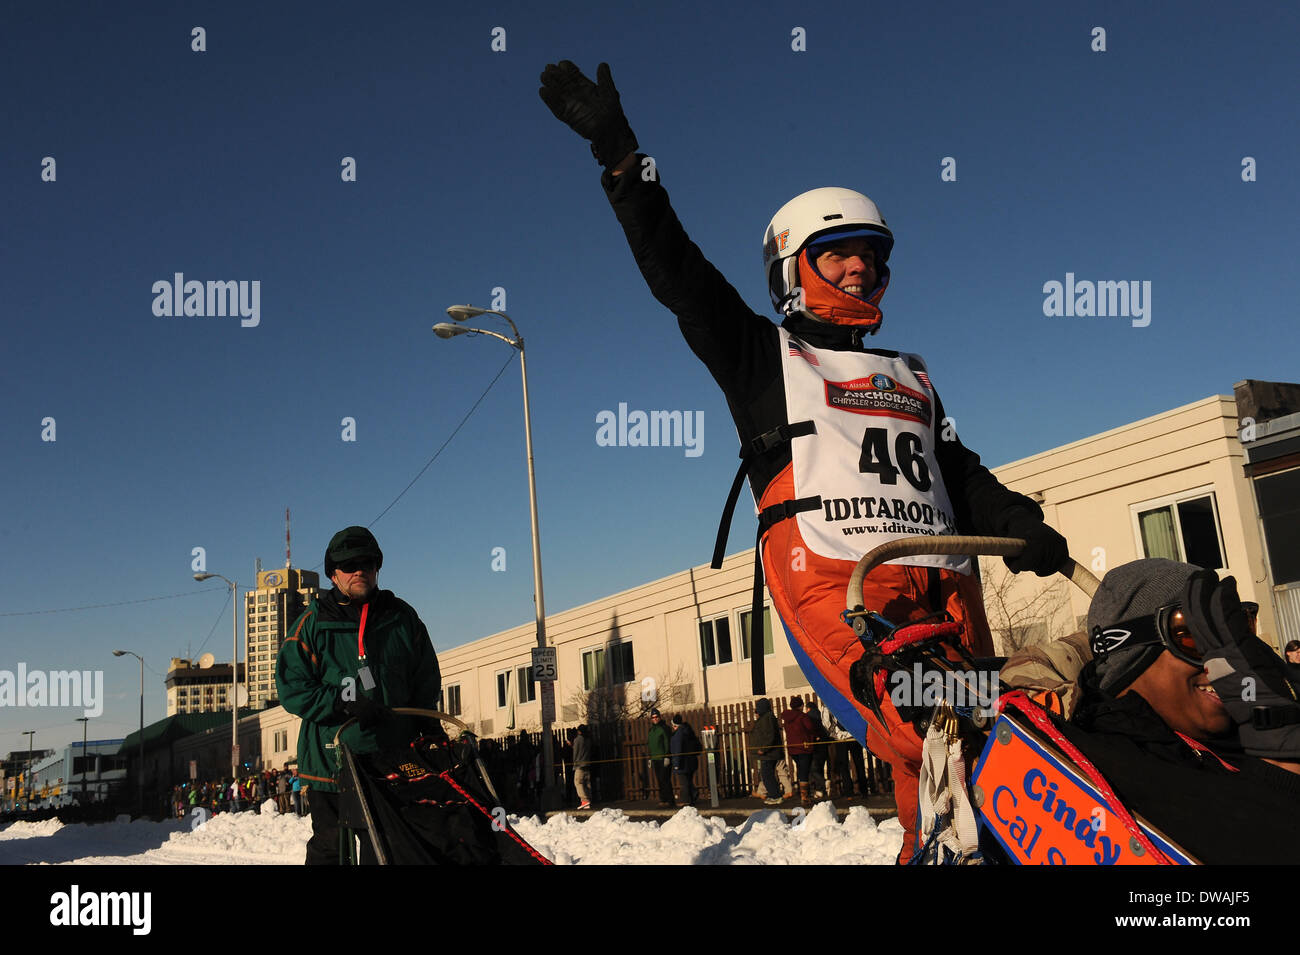 Anchoarge, AK, USA. 1st Mar, 2014. BOB HALLINEN / Anchorage Daily News.Cindy Abbott, of Irvine, CA, waves to the crowd during the ceremonial start of the 2014 Iditarod Sled Dog Race on Fourth Avenue in downtown Anchorage on Saturday, March 1, 2014. 140301 Credit:  Bob Hallinen/Anchorage Daily News/ZUMAPRESS.com/Alamy Live News Stock Photo